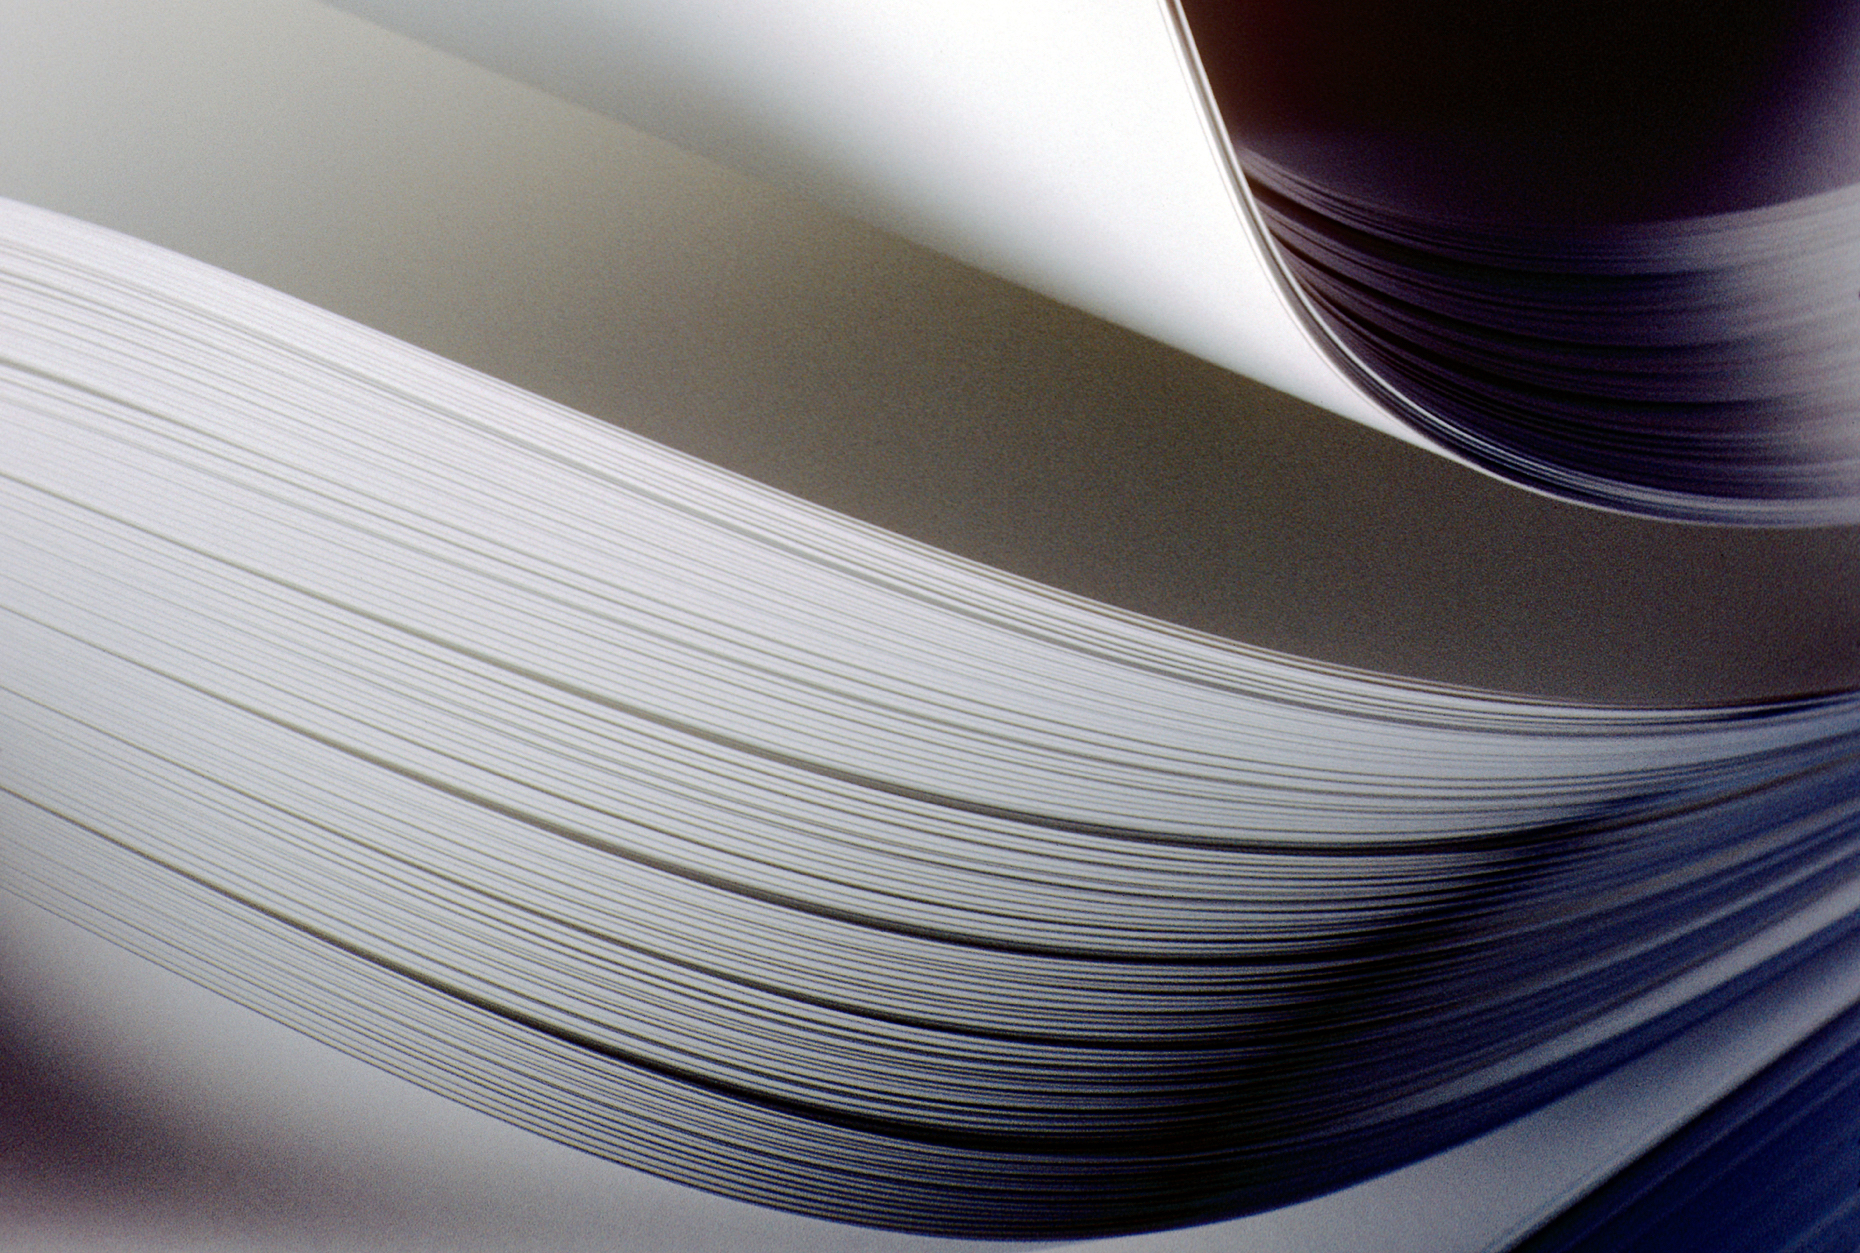 Large sheets of printing paper